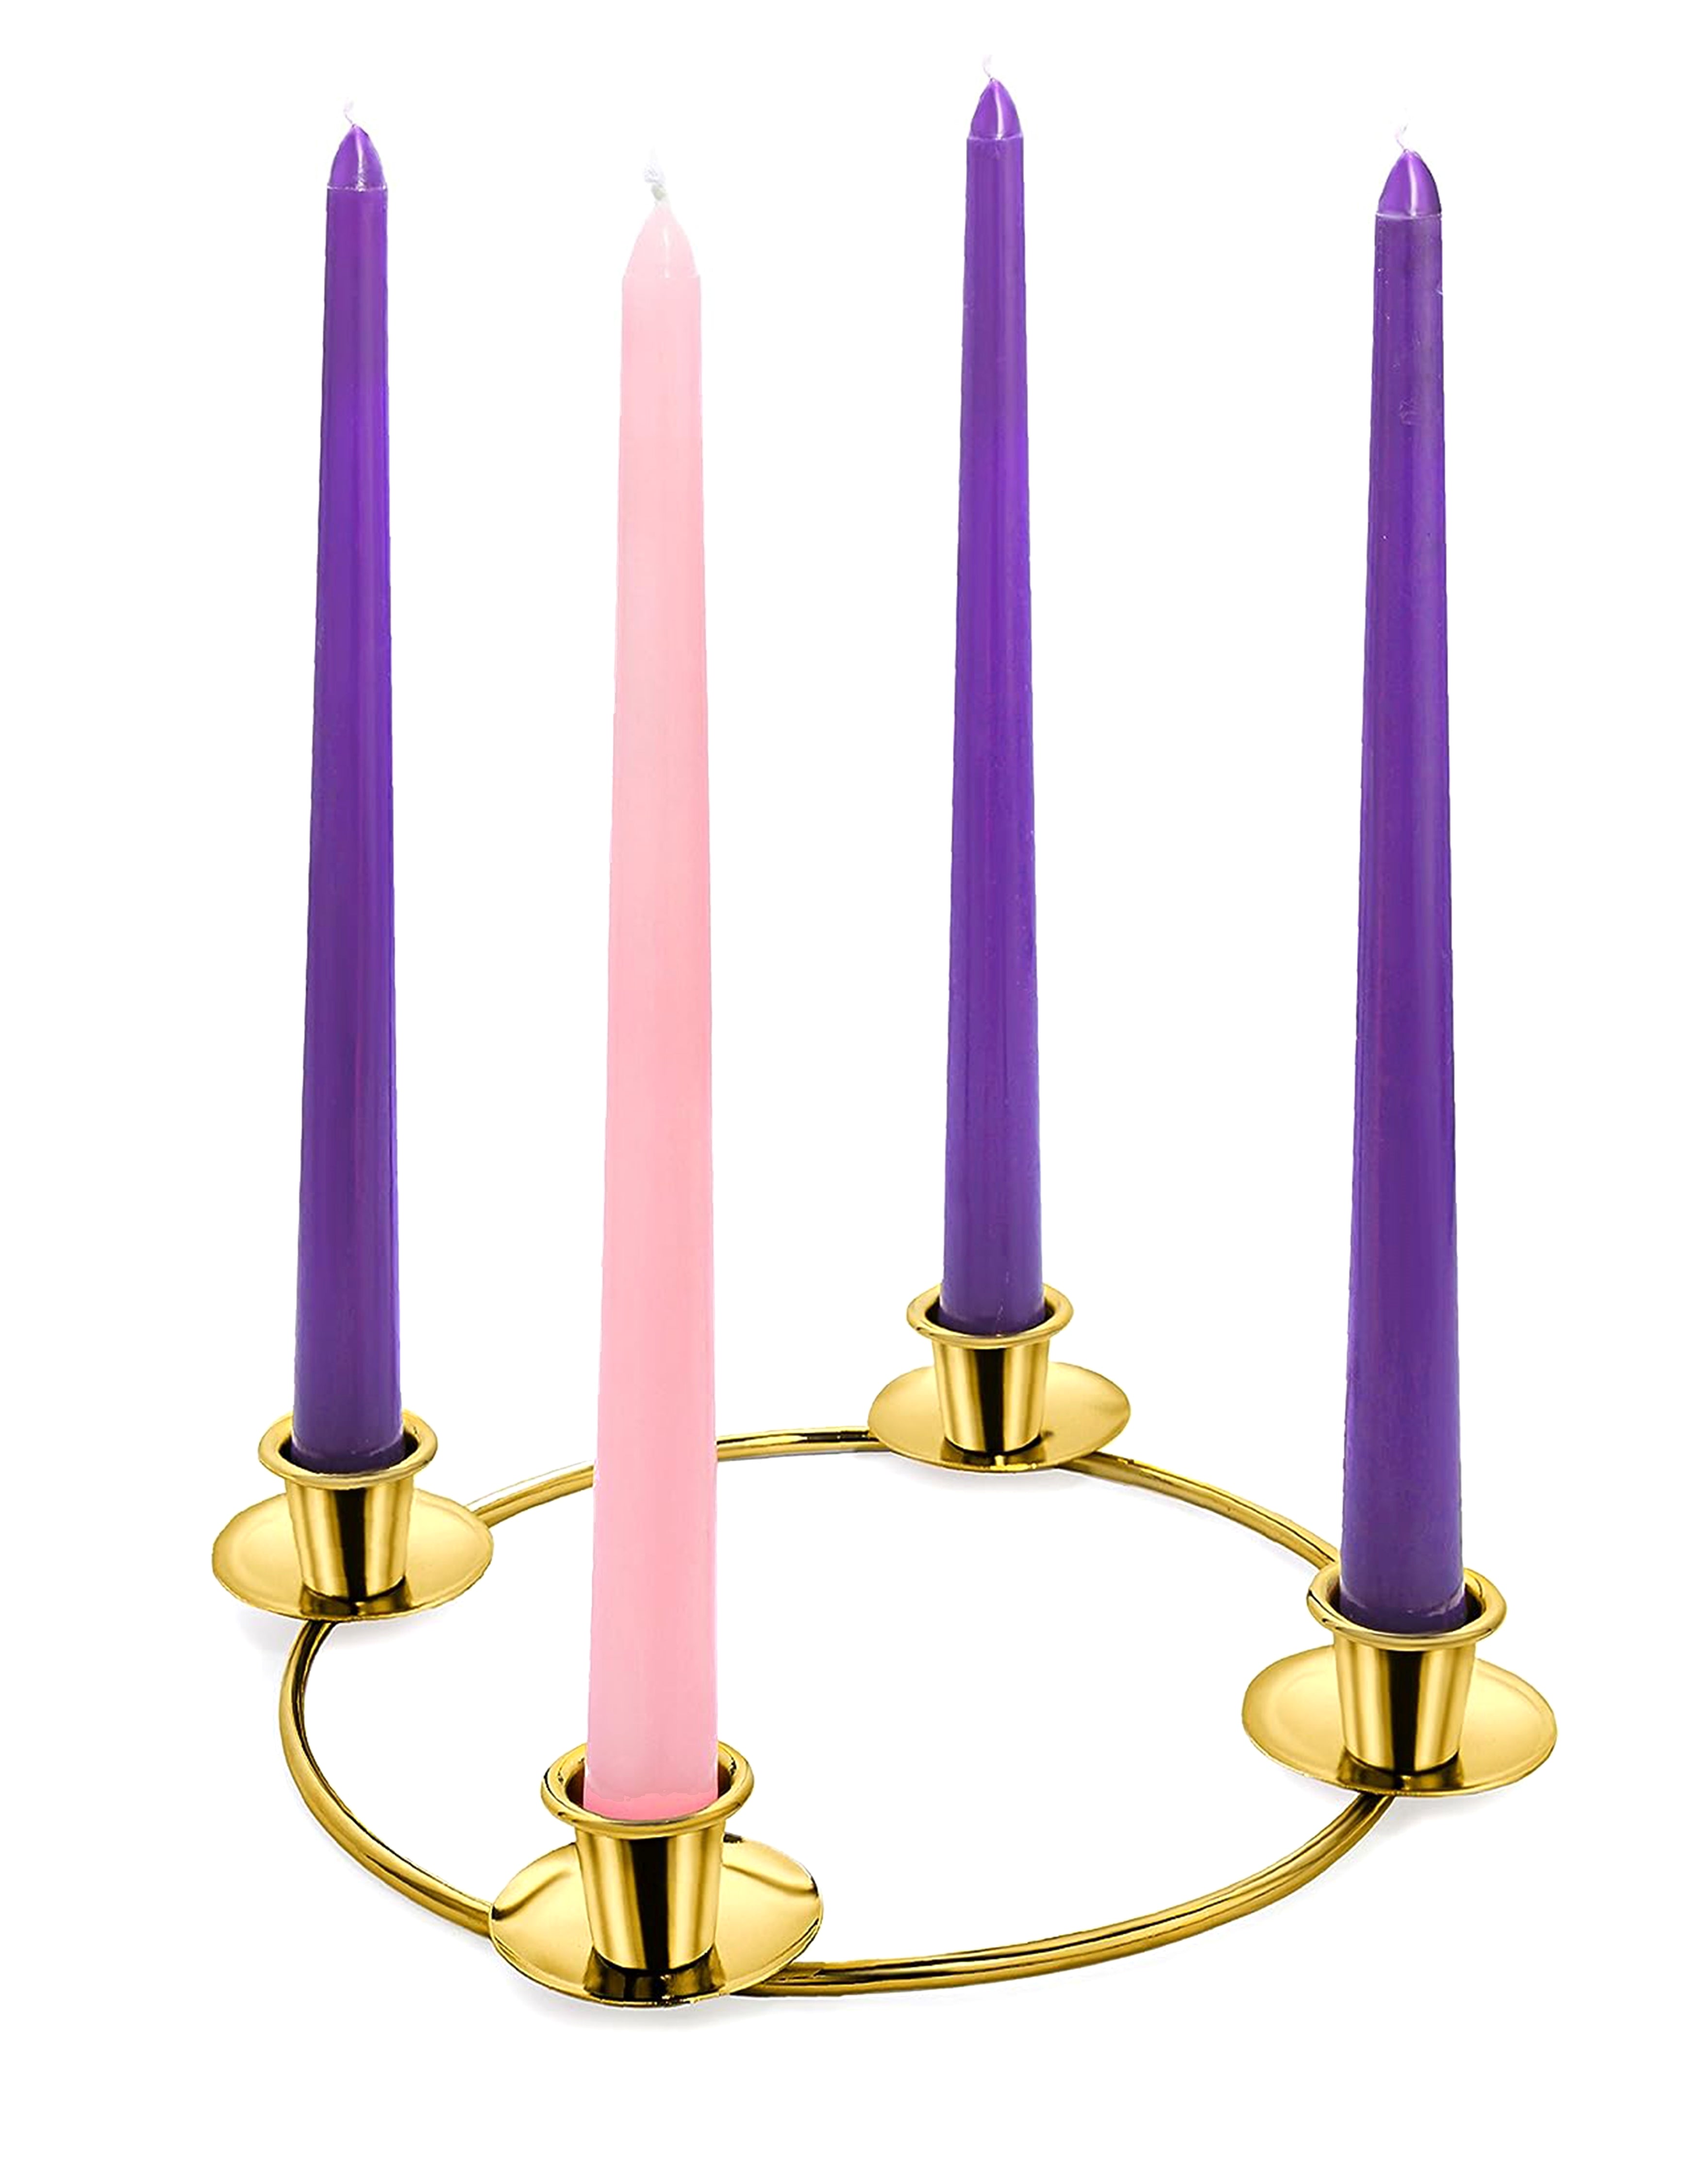 Advent Wreath Set Includes candle holders and 4 candles comes with 3 purple candles and 1 rose candle